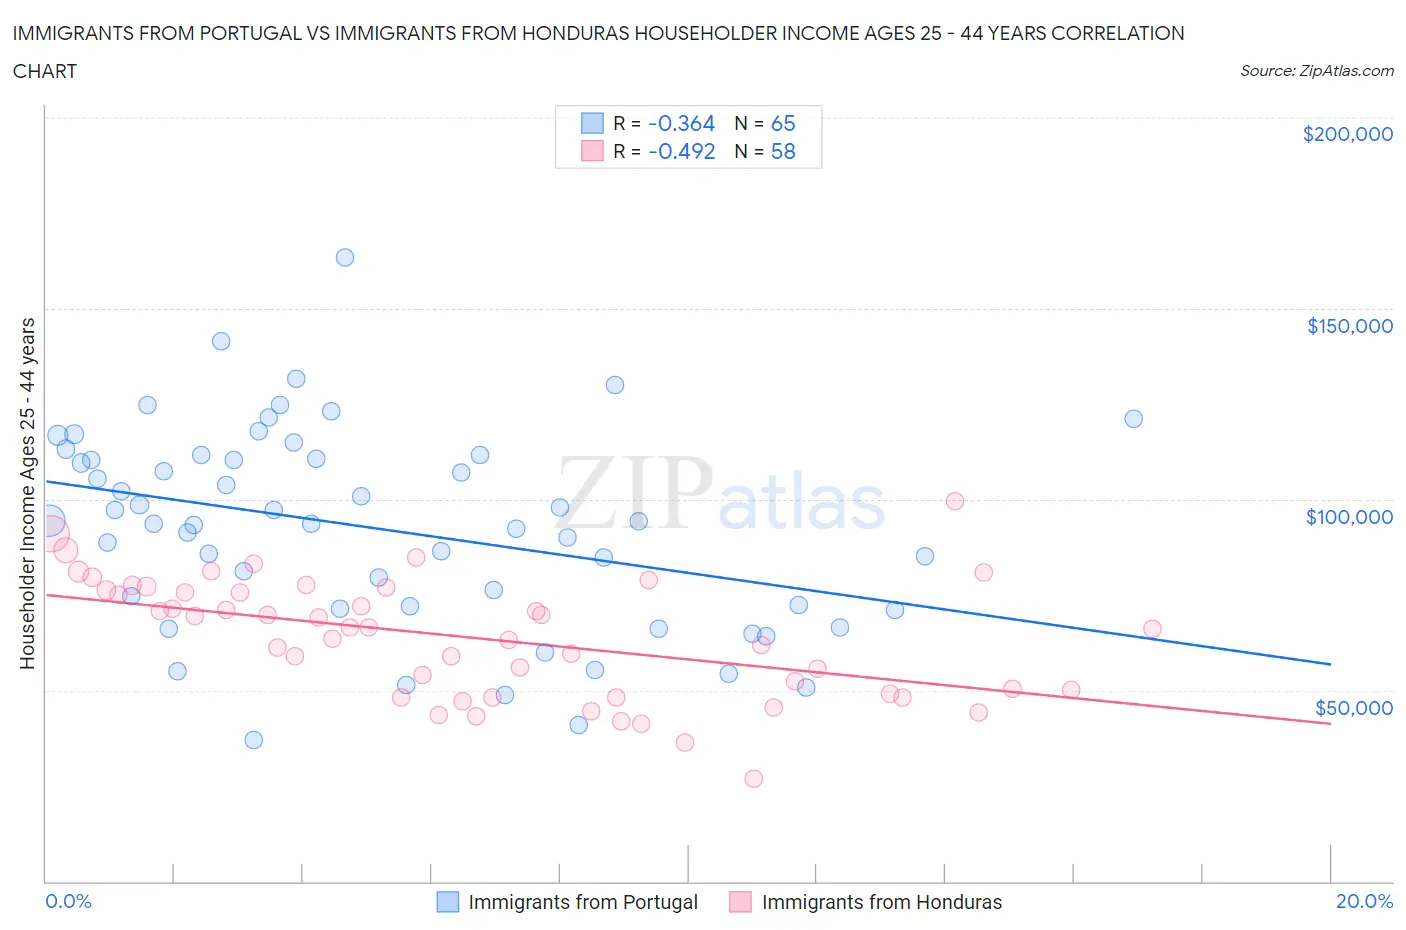 Immigrants from Portugal vs Immigrants from Honduras Householder Income Ages 25 - 44 years